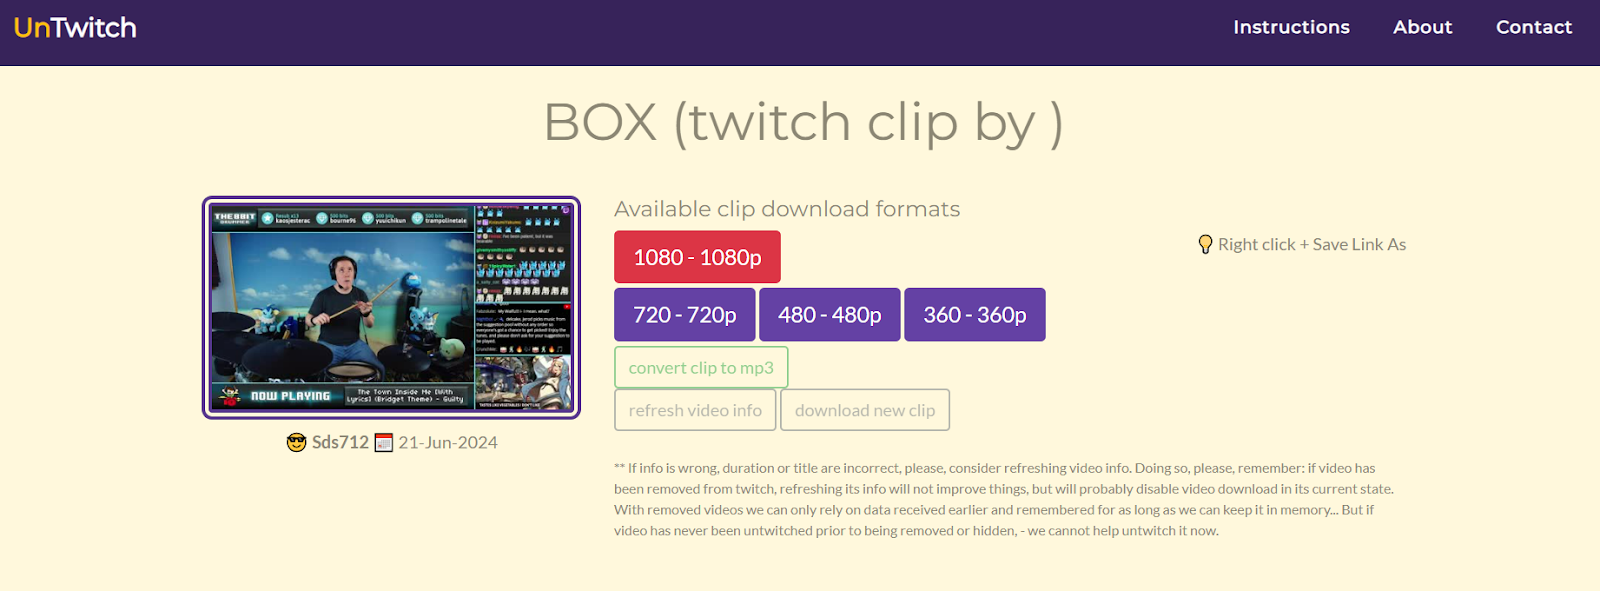 UnTwitch screenshot with clip download formates from 1080p to 360p, the “convert clip to mp3” button, the refresh video info feature, and a button for downloading another clip